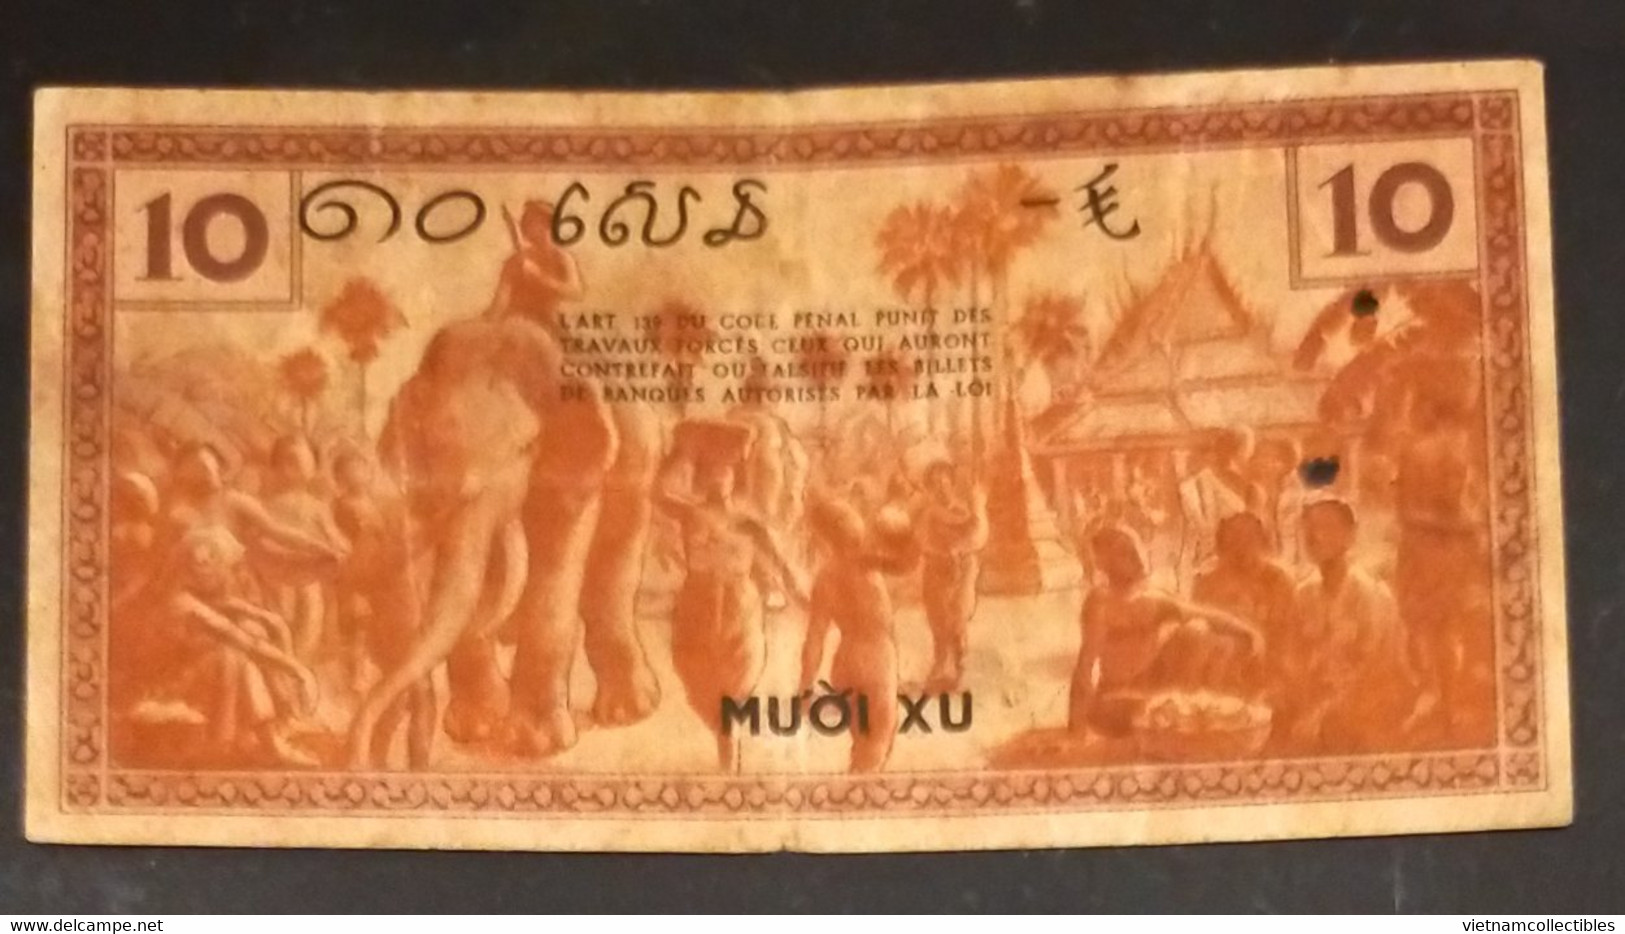 French Indochine Indochina Vietnam Viet Nam Laos Cambodia 10 Cents VF Banknote Note Billet 1939 - Pick # 85a / 02 Photos - Indochina